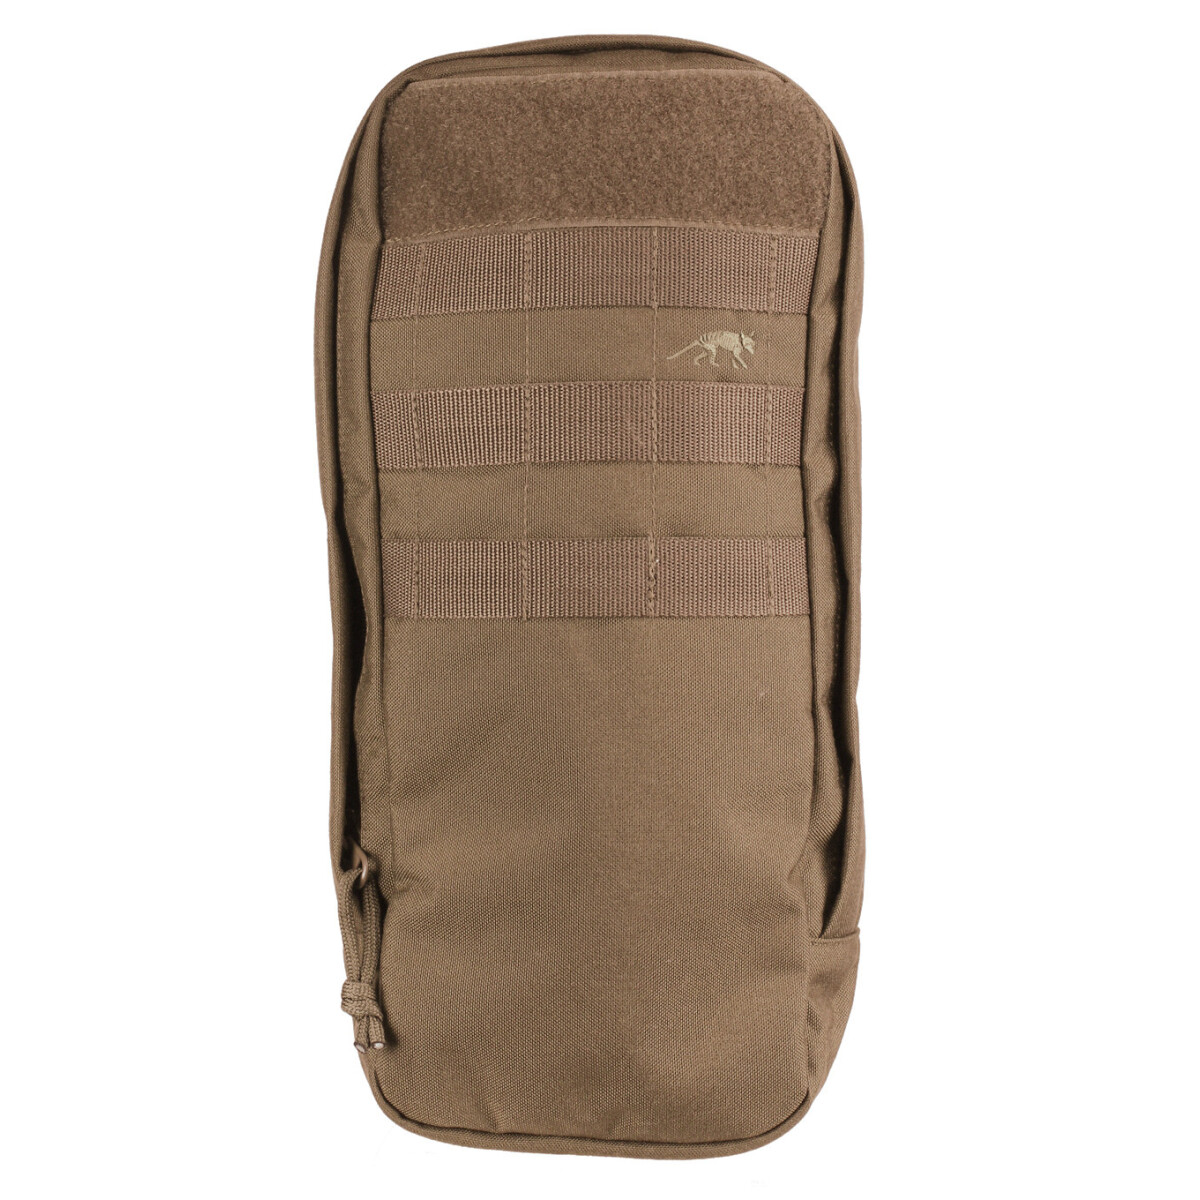 Tasmanian Tiger Tac Pouch 8 SP coyote brown